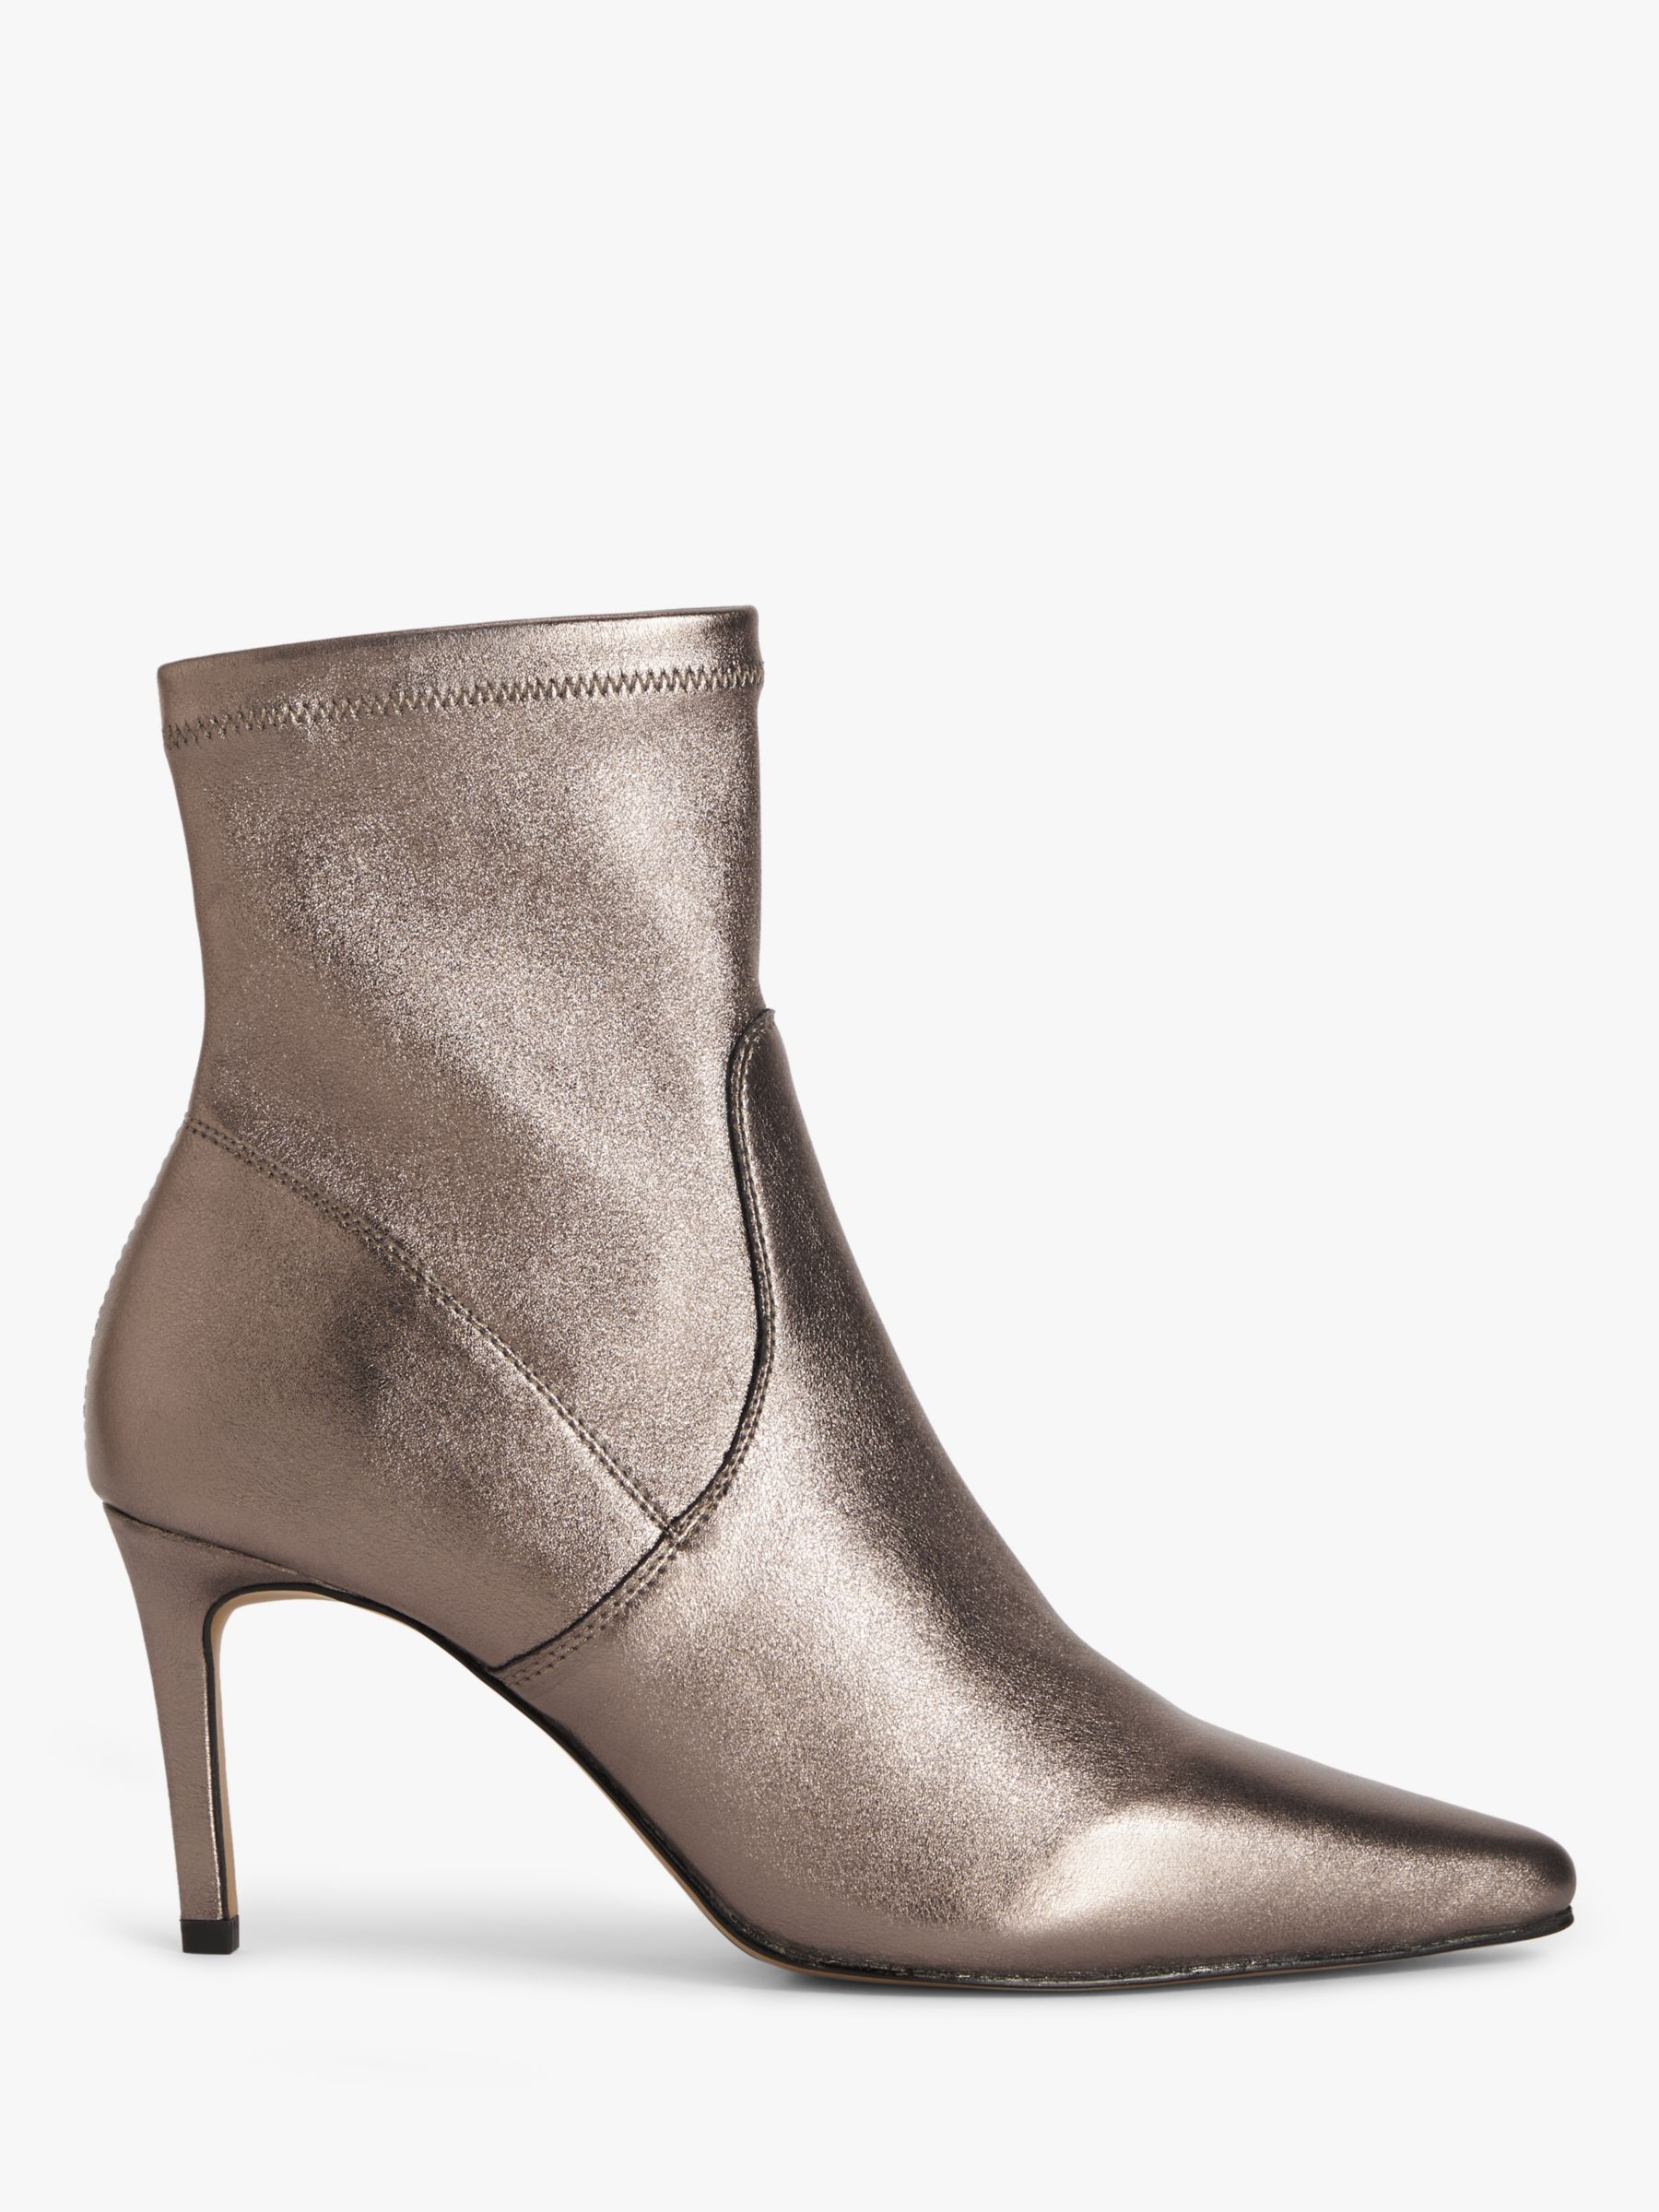 Buy John Lewis Olivia Microfibre Stretch Stiletto Heel Ankle Boots Online at johnlewis.com